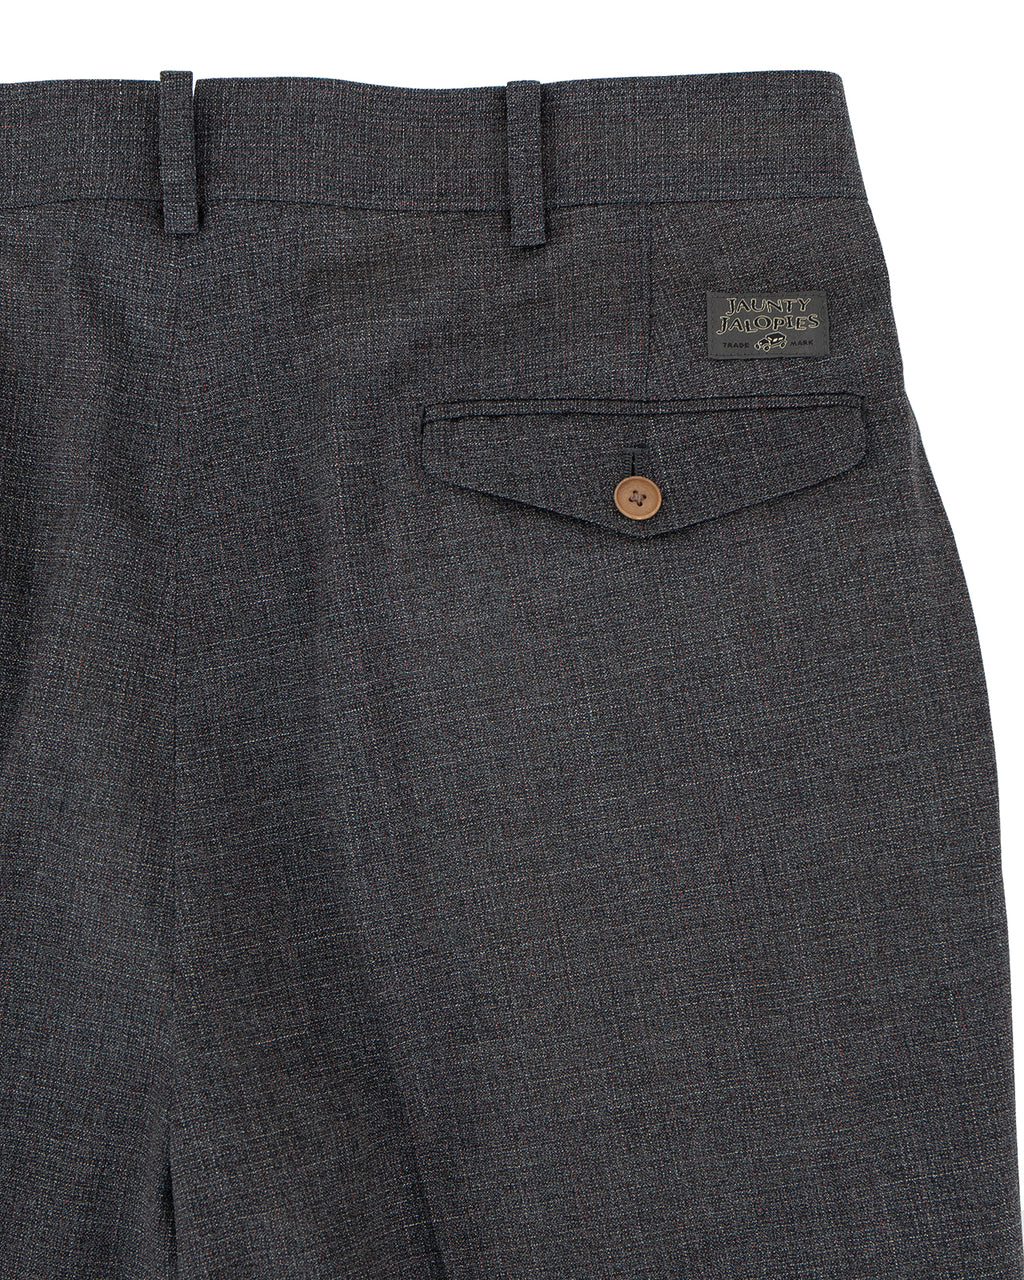 By Glad Hand Jaunty Jalopies Stomp Fit Trousers, Charcoal